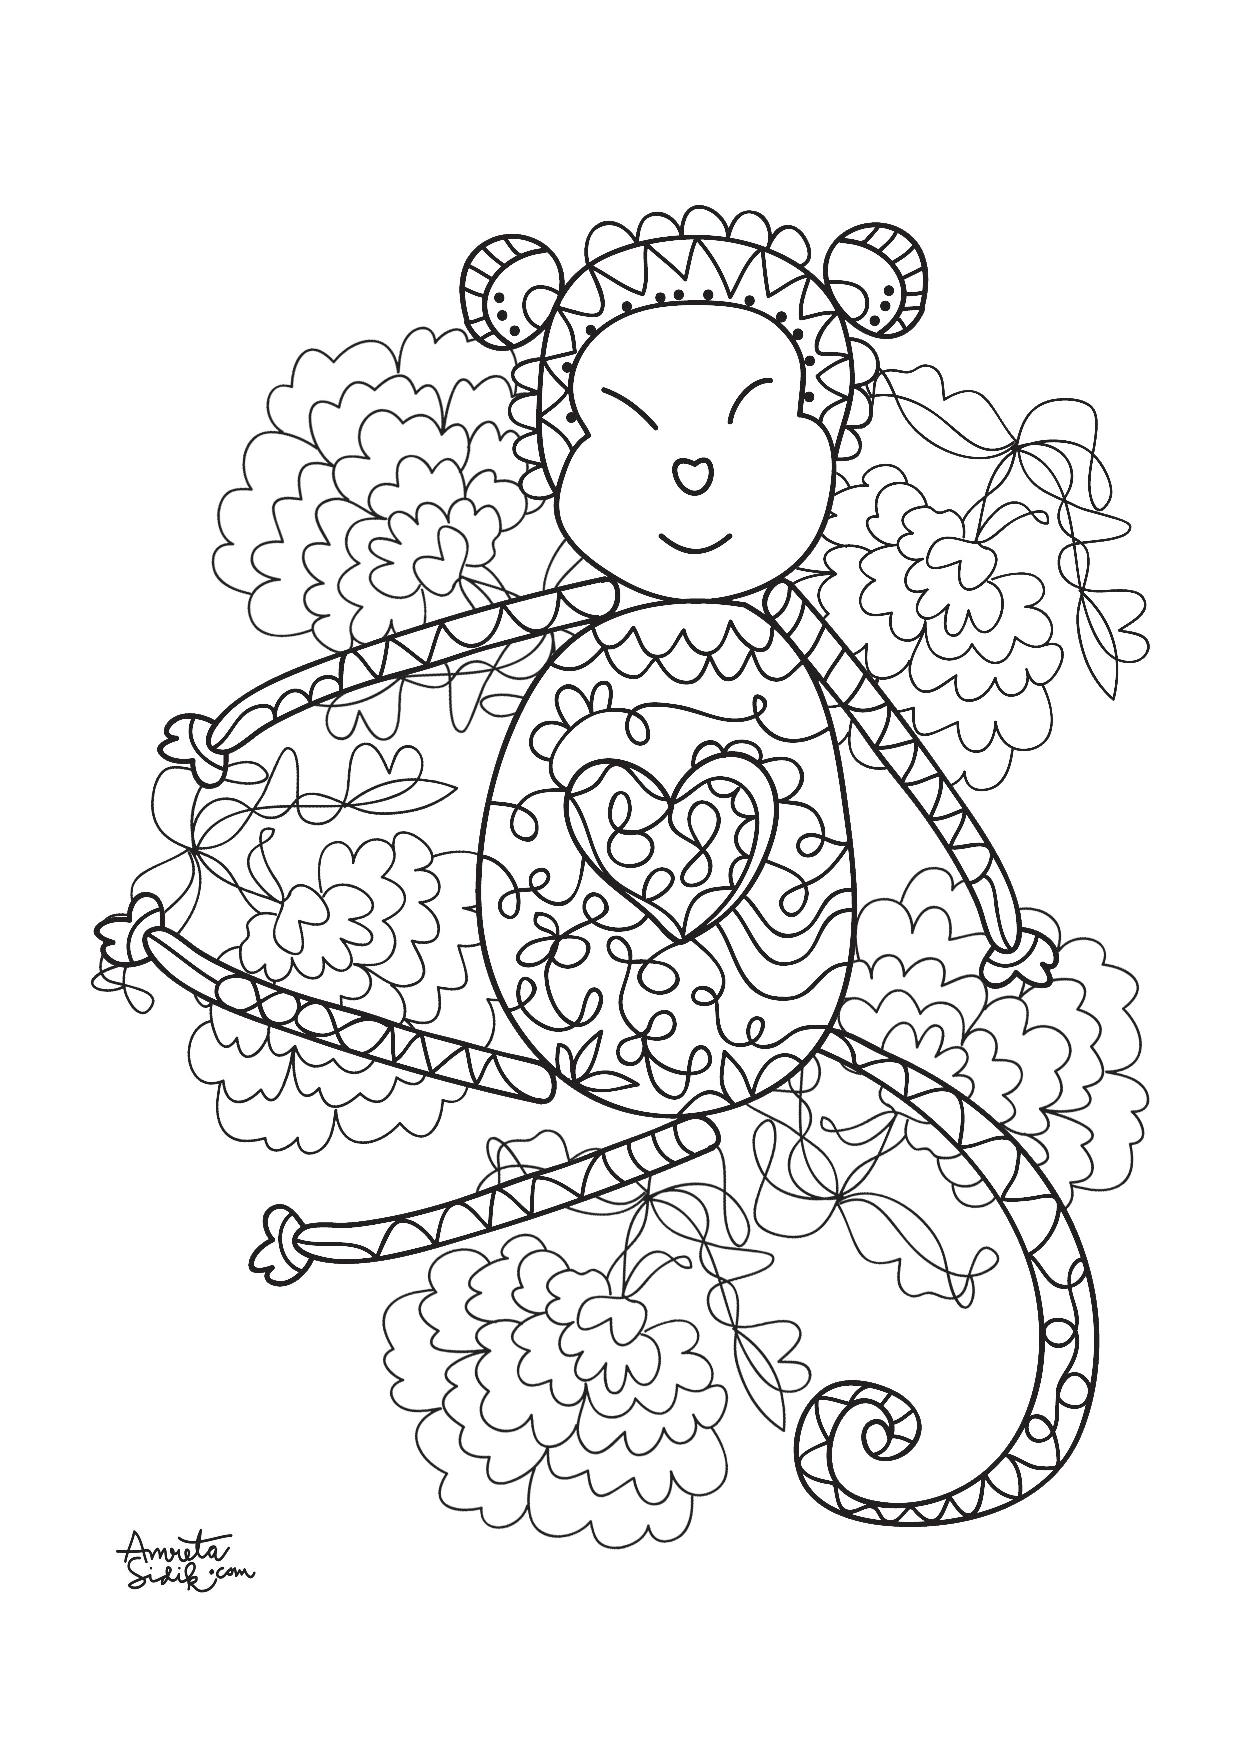 Fancy Coloring Pages For Adults - Coloring Home